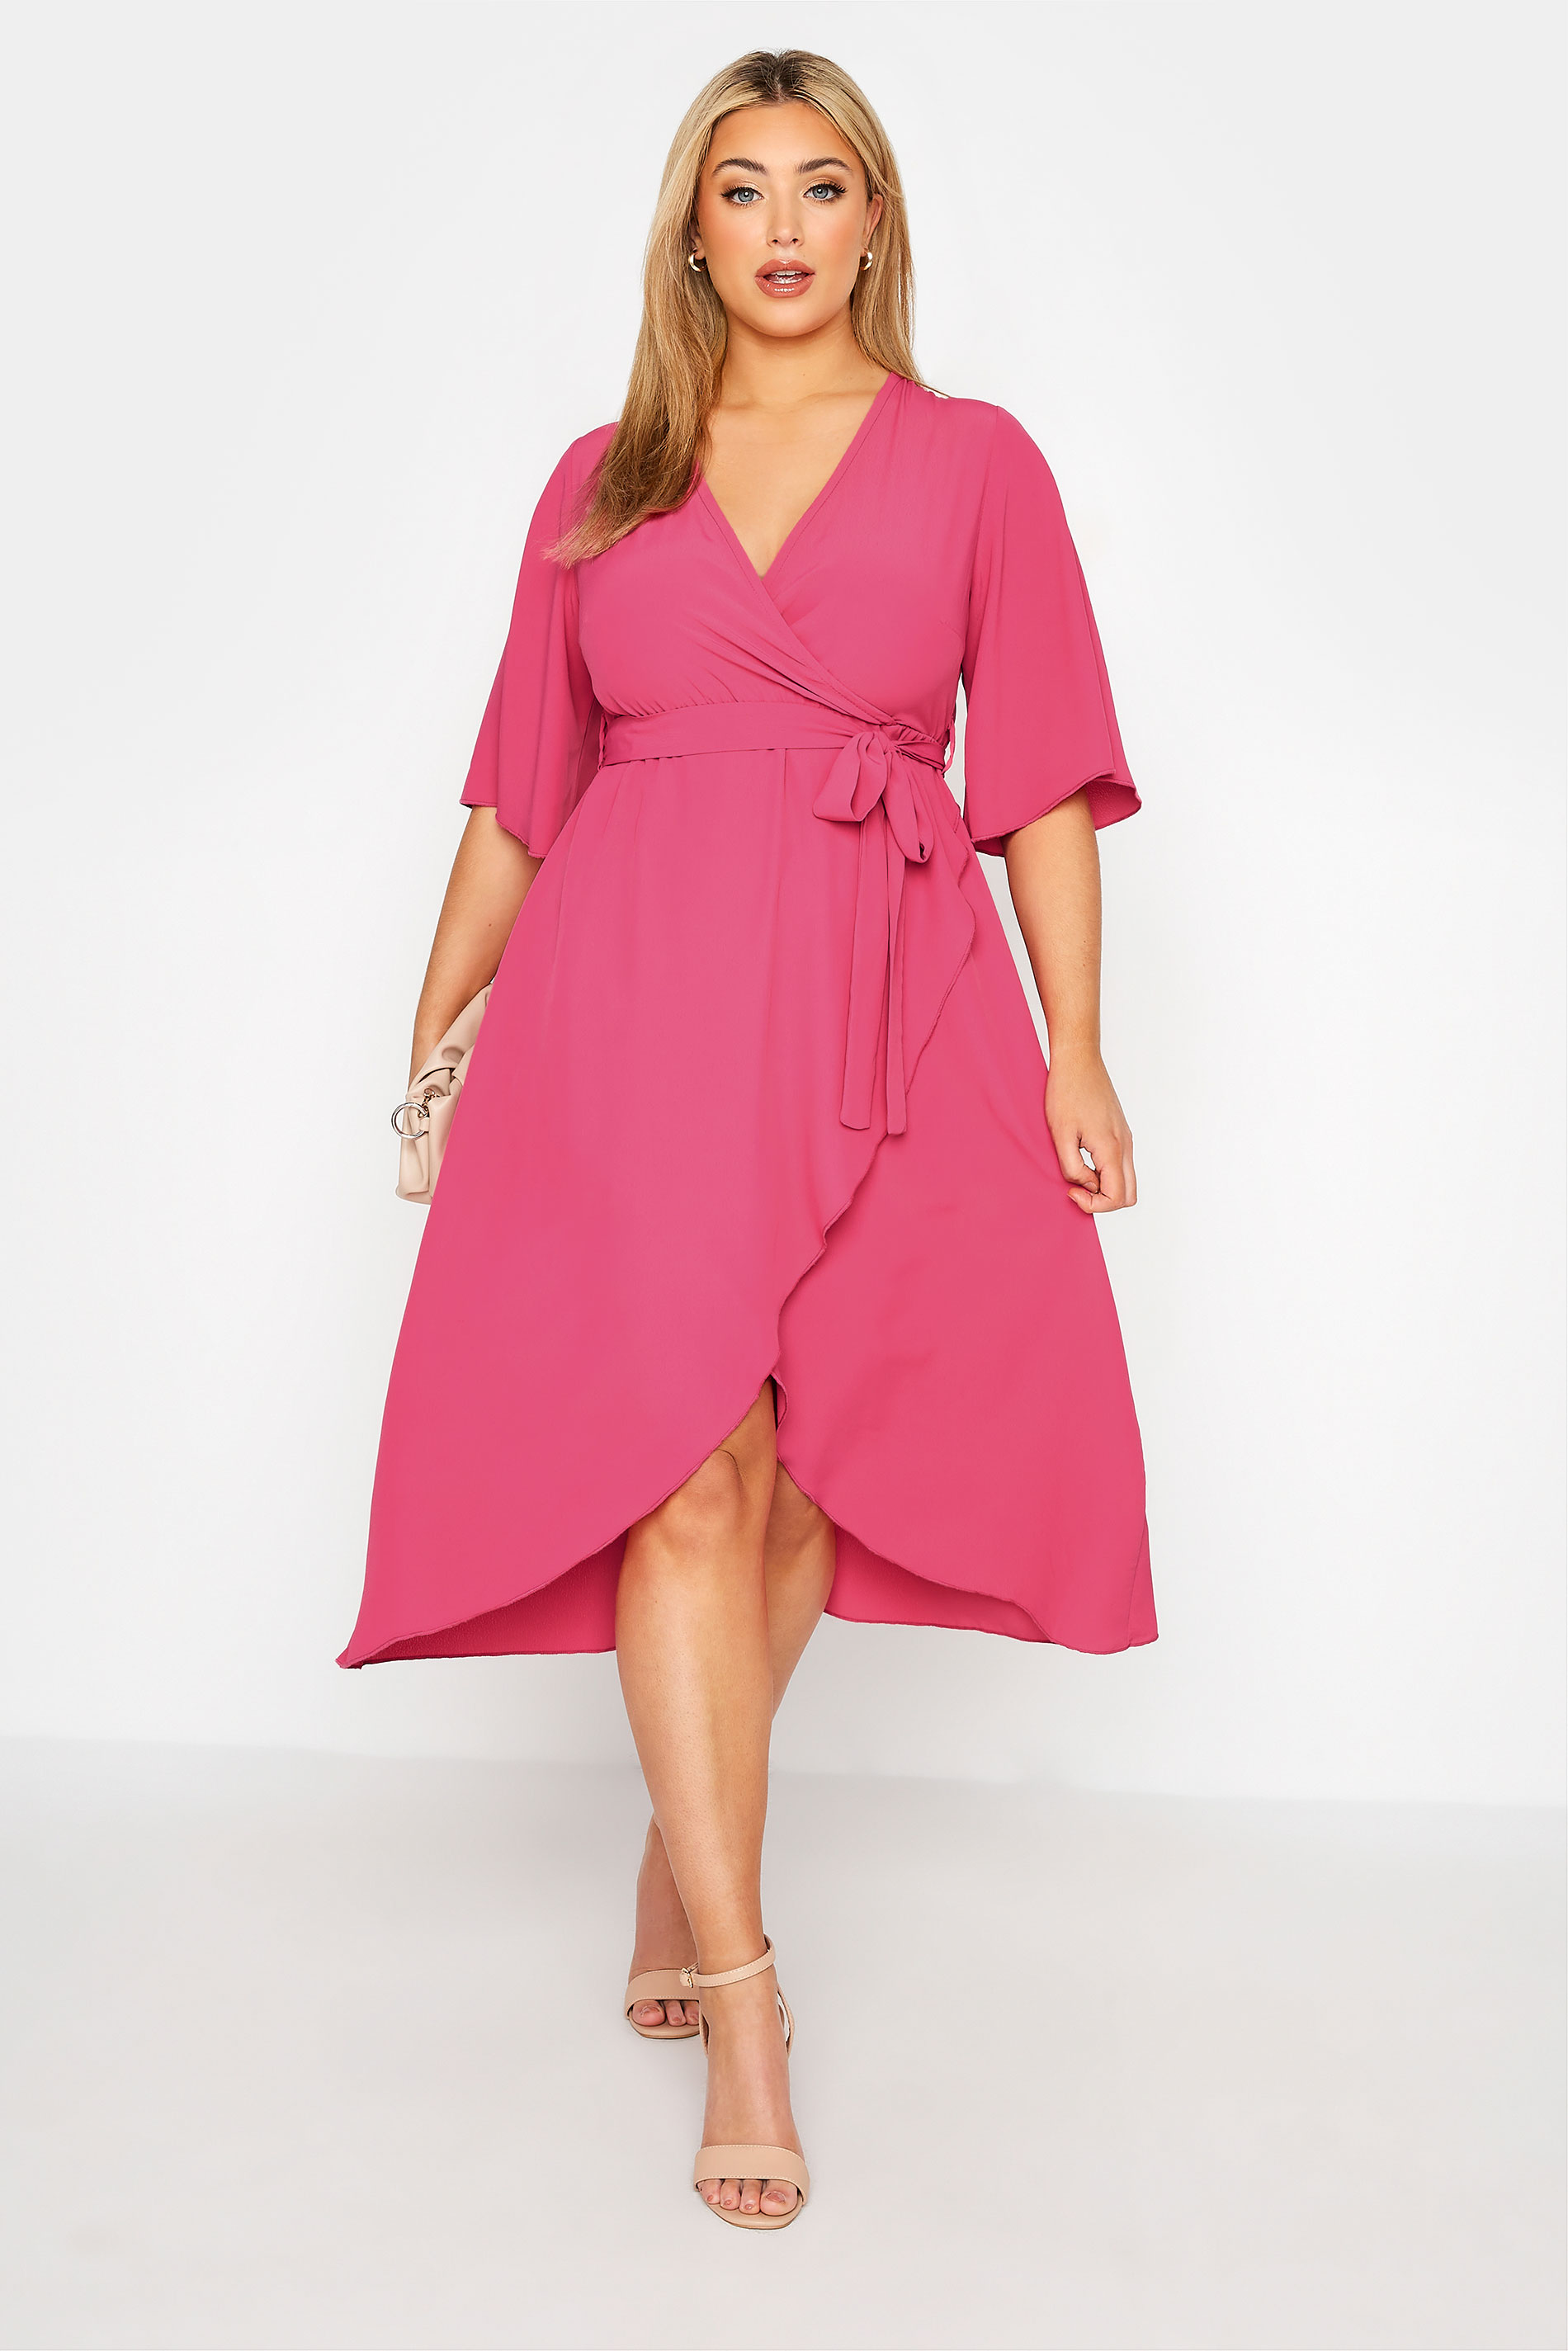 Robes Grande Taille Grande taille  Robes Portefeuilles | YOURS LONDON - Robe Rose Style Portefeuille - NJ38665